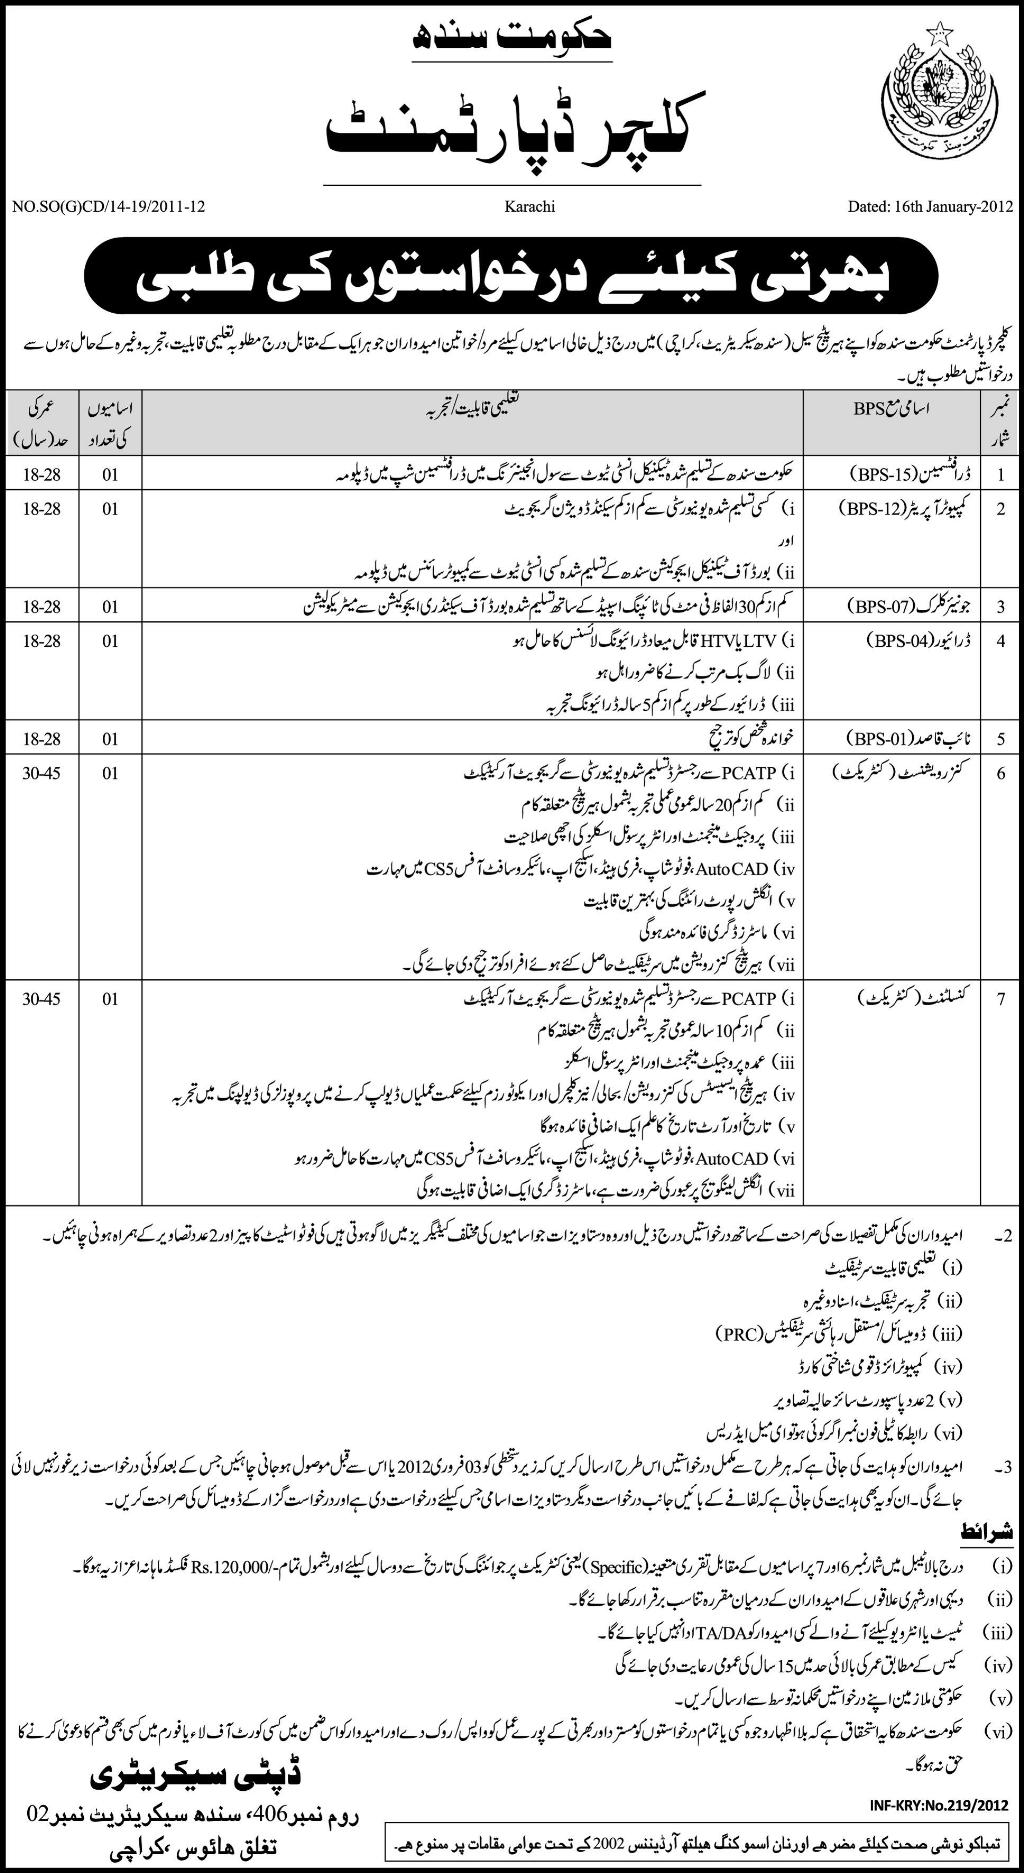 Culture Department, Government of Sindh Jobs Opportunity